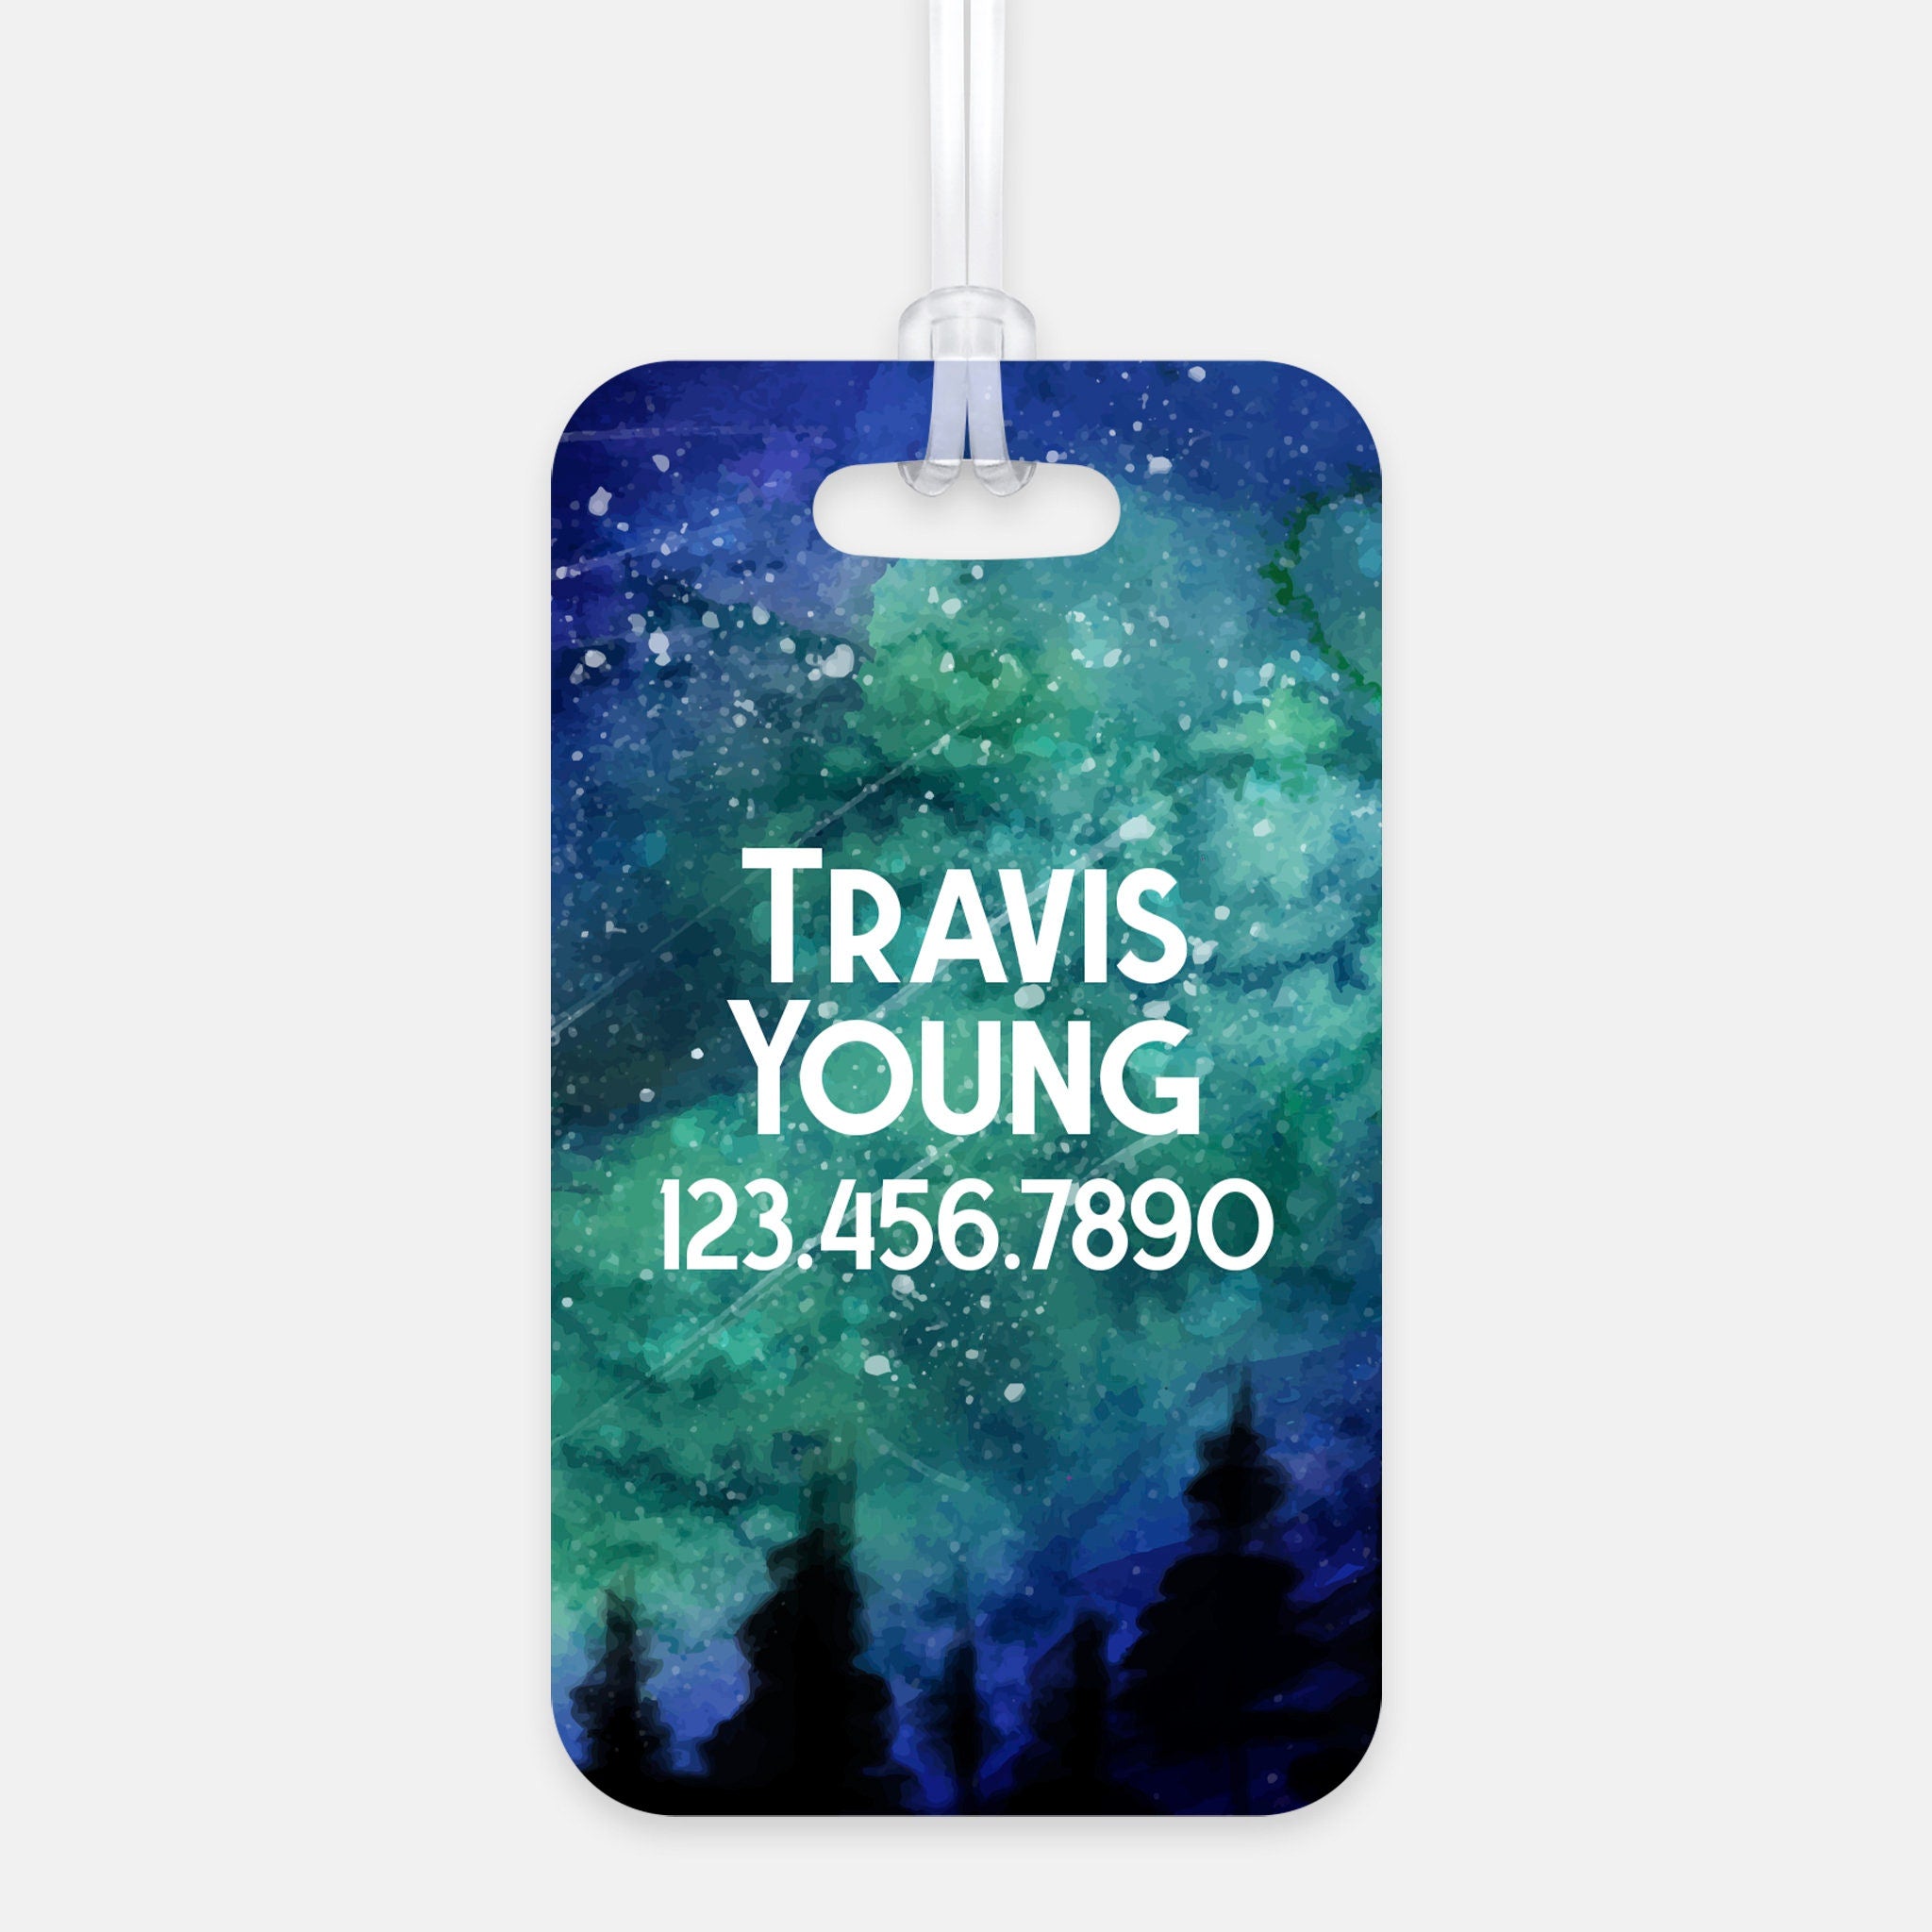 Personalized Backpack Name Tags Order Cheapest